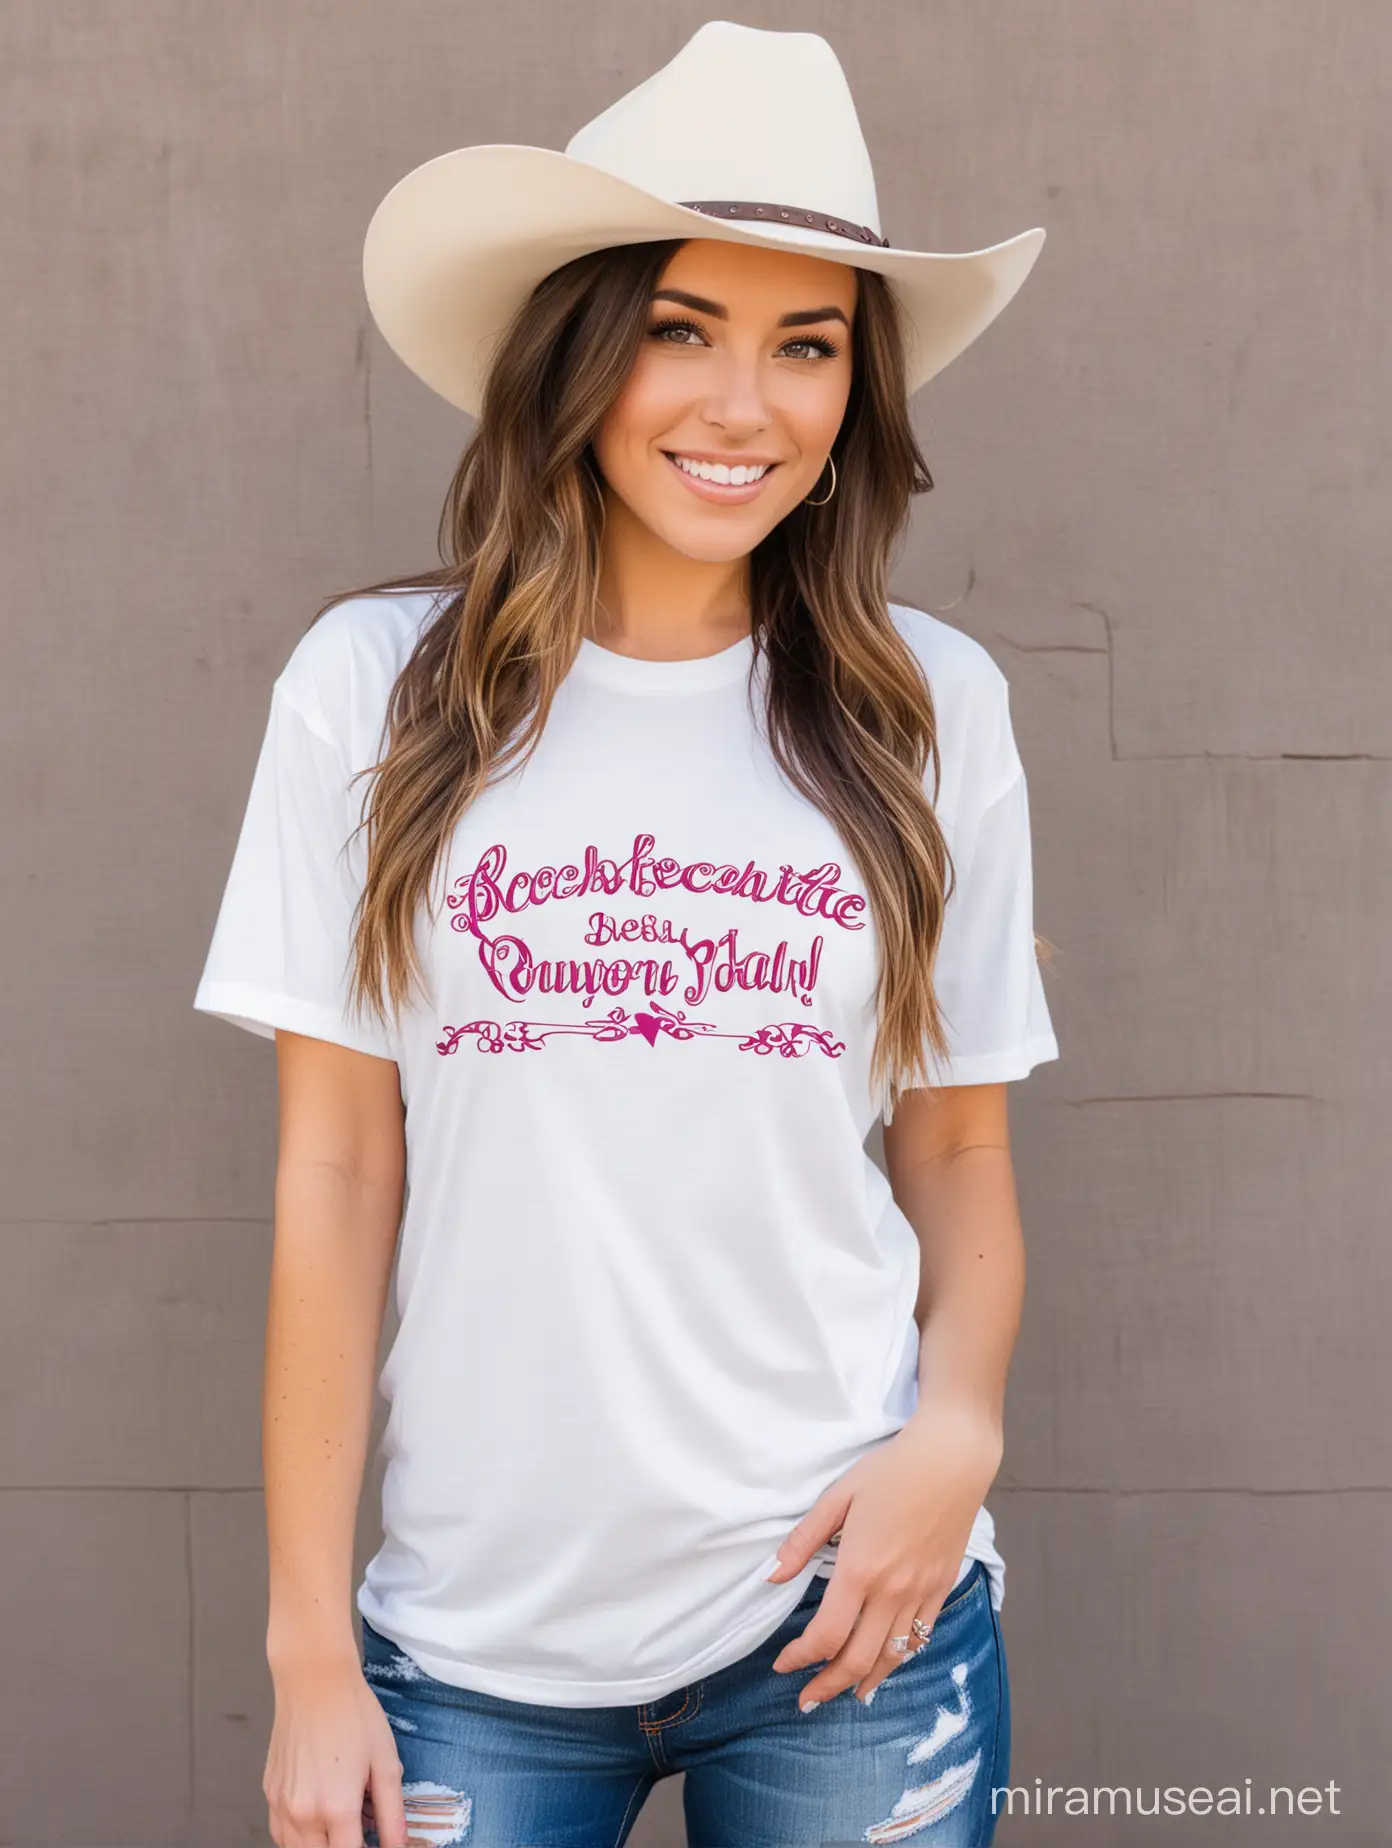 oversized plain bella canvas white tshirt worn by Bachelorette Party cowgirl wearing cowboy hat mock up